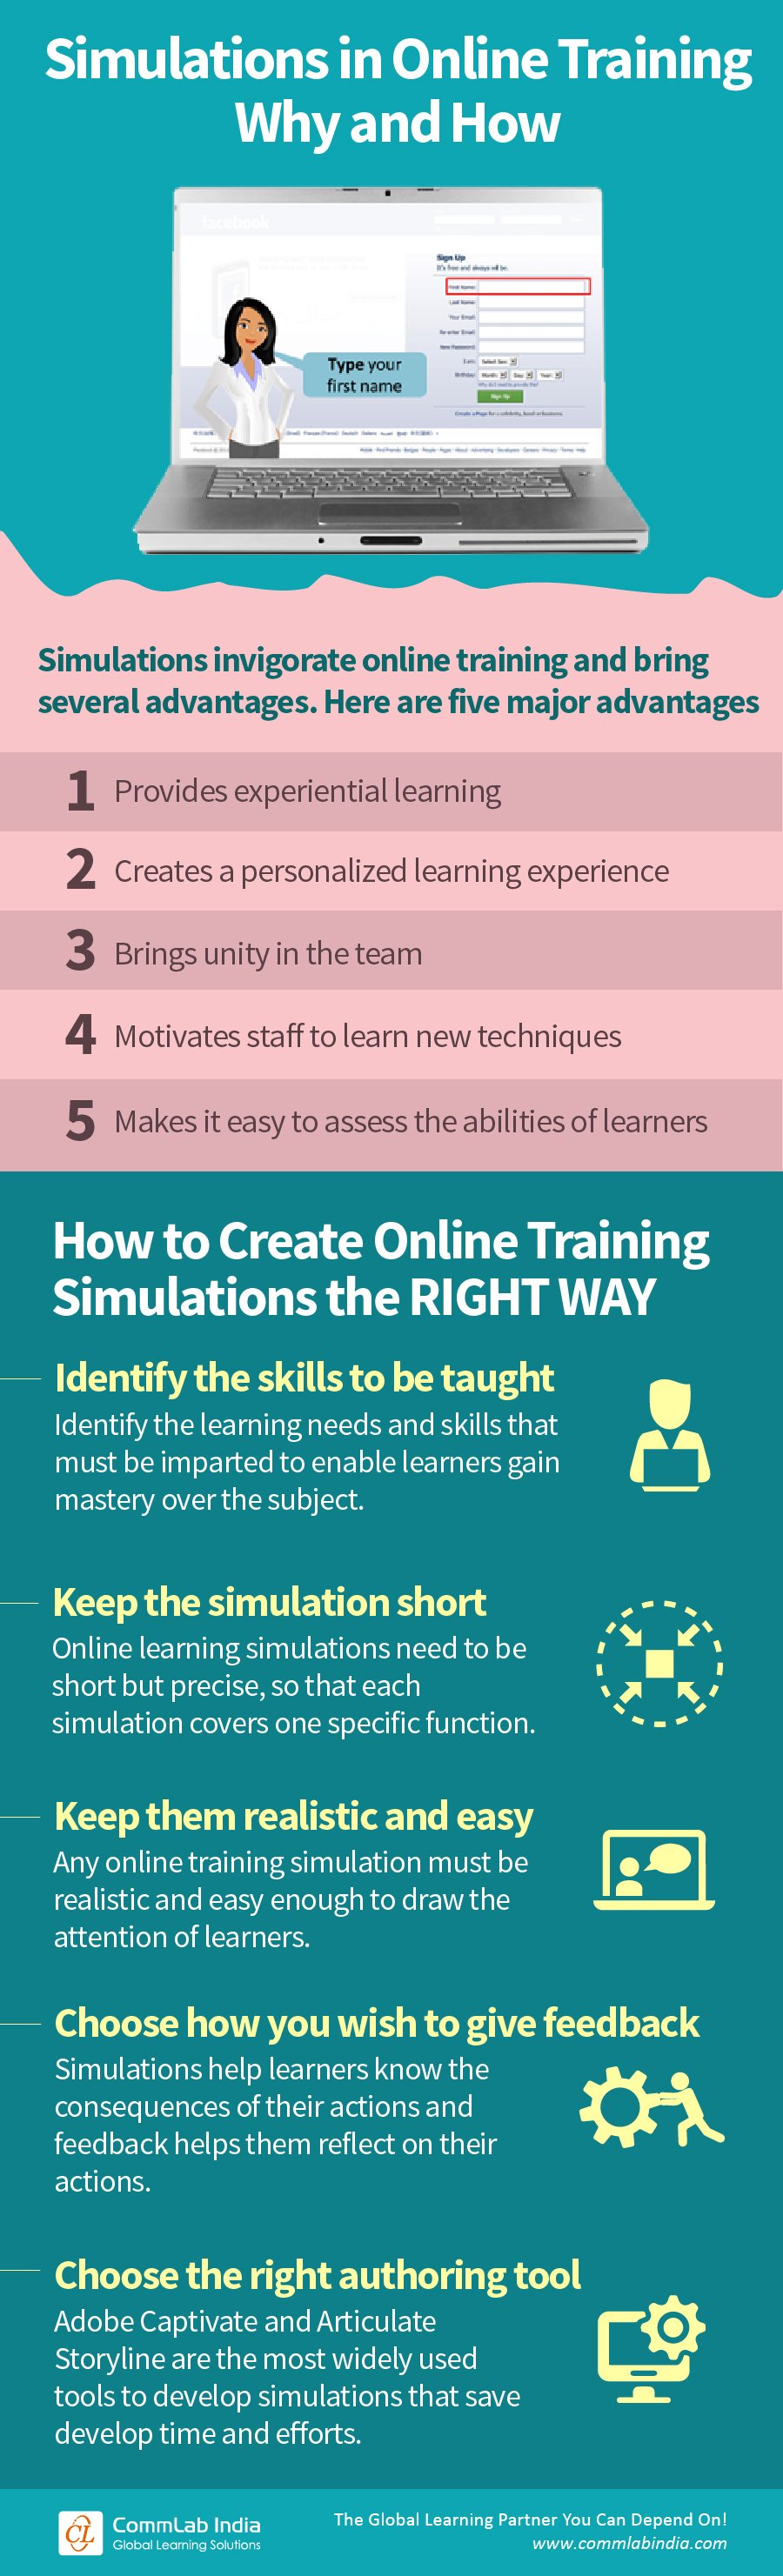 Simulations in Online Training: Why and How [Infographic]